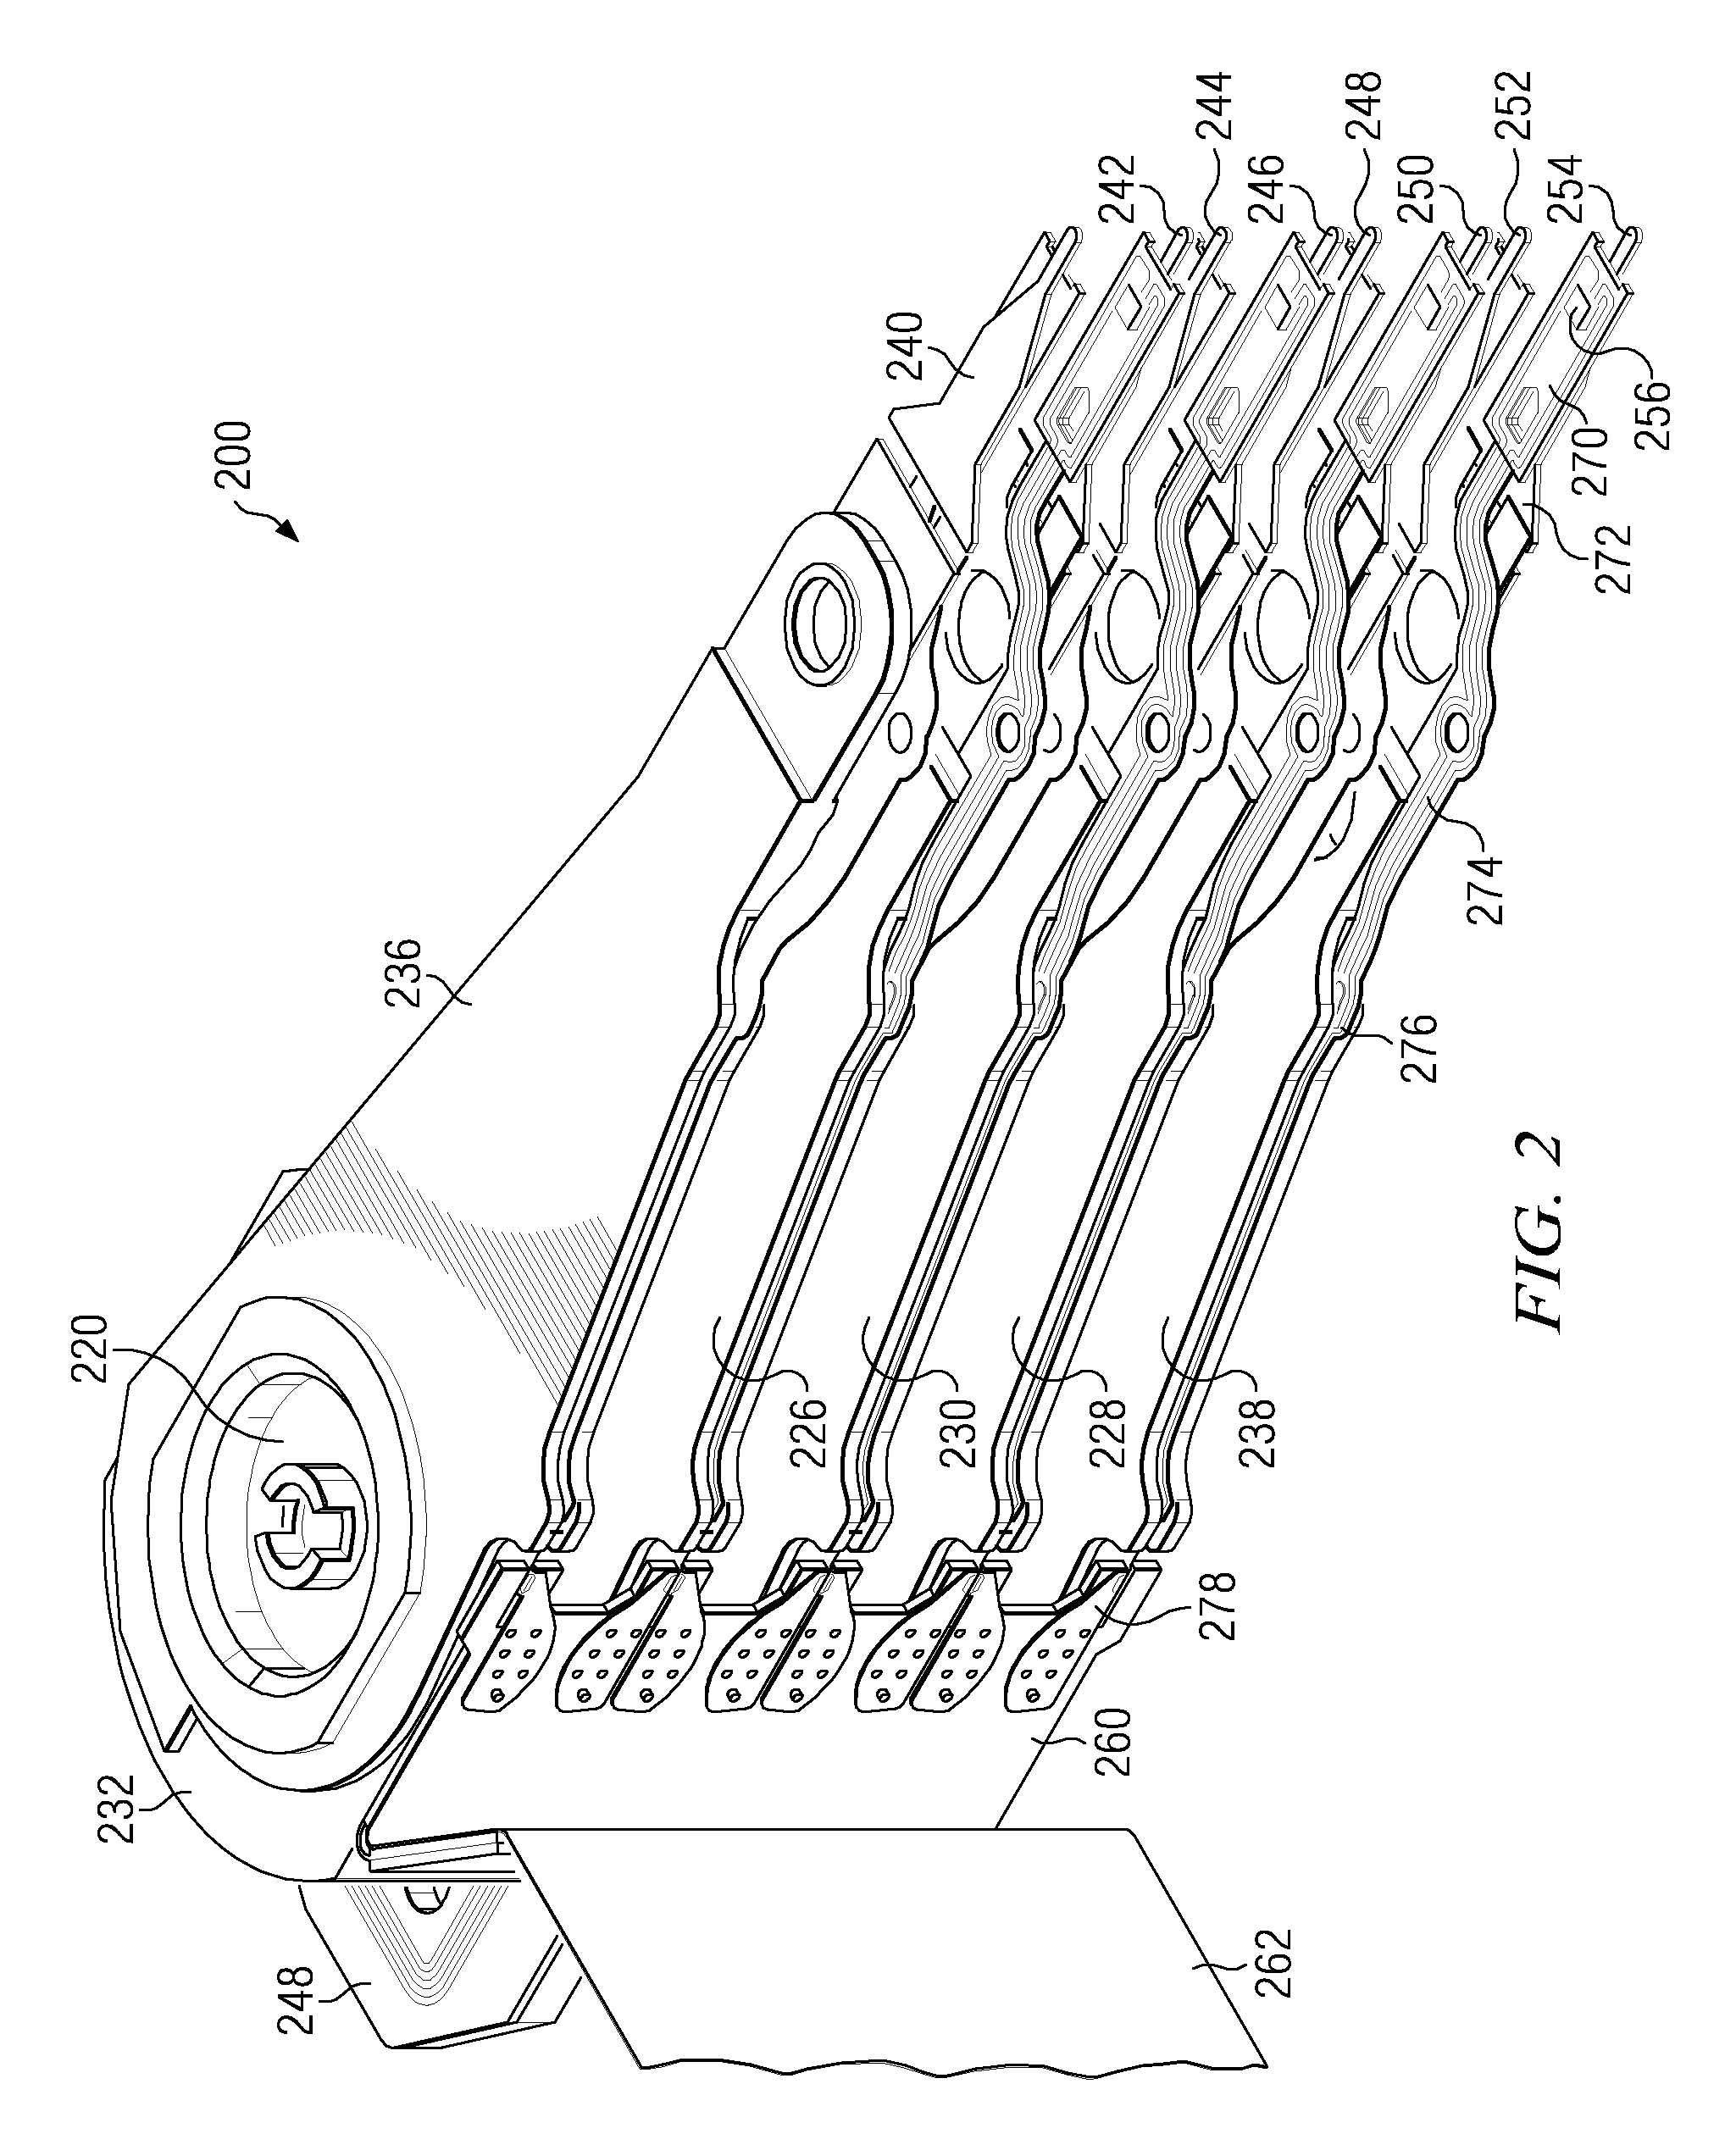 Head stack assembly with suspension tails extending into interfering slits in a flexible printed circuit